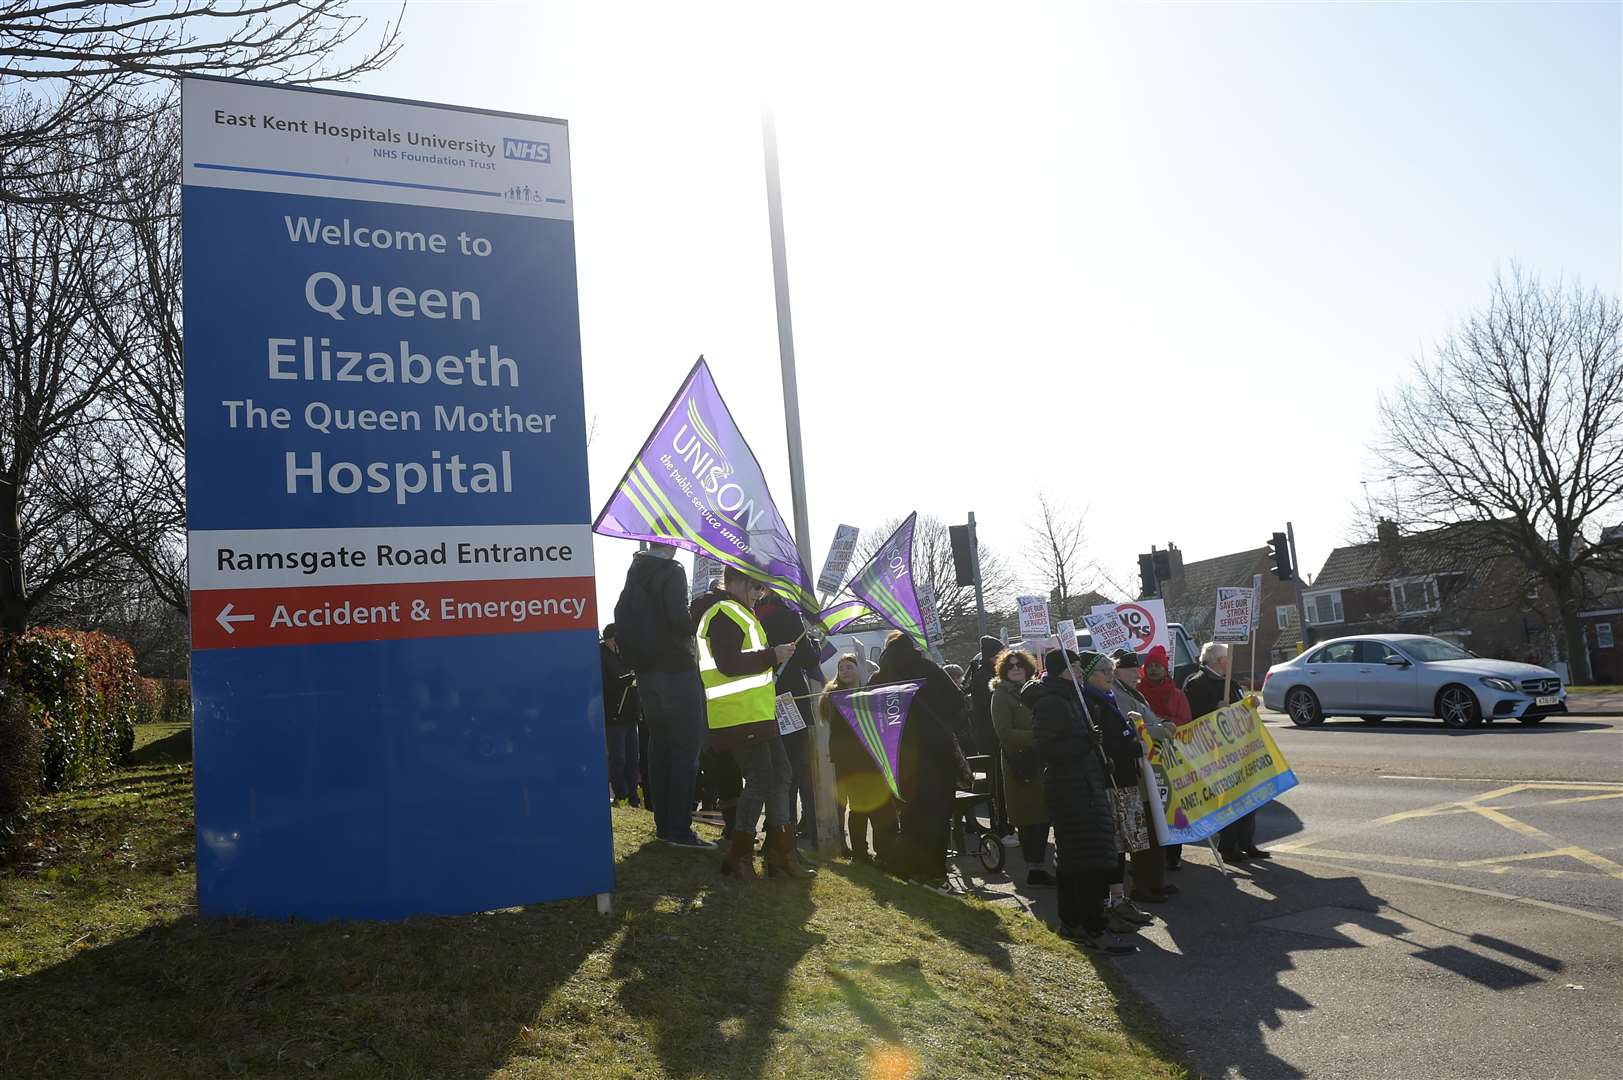 Campaigners have been protesting to save the stroke unit at the Margate hospital